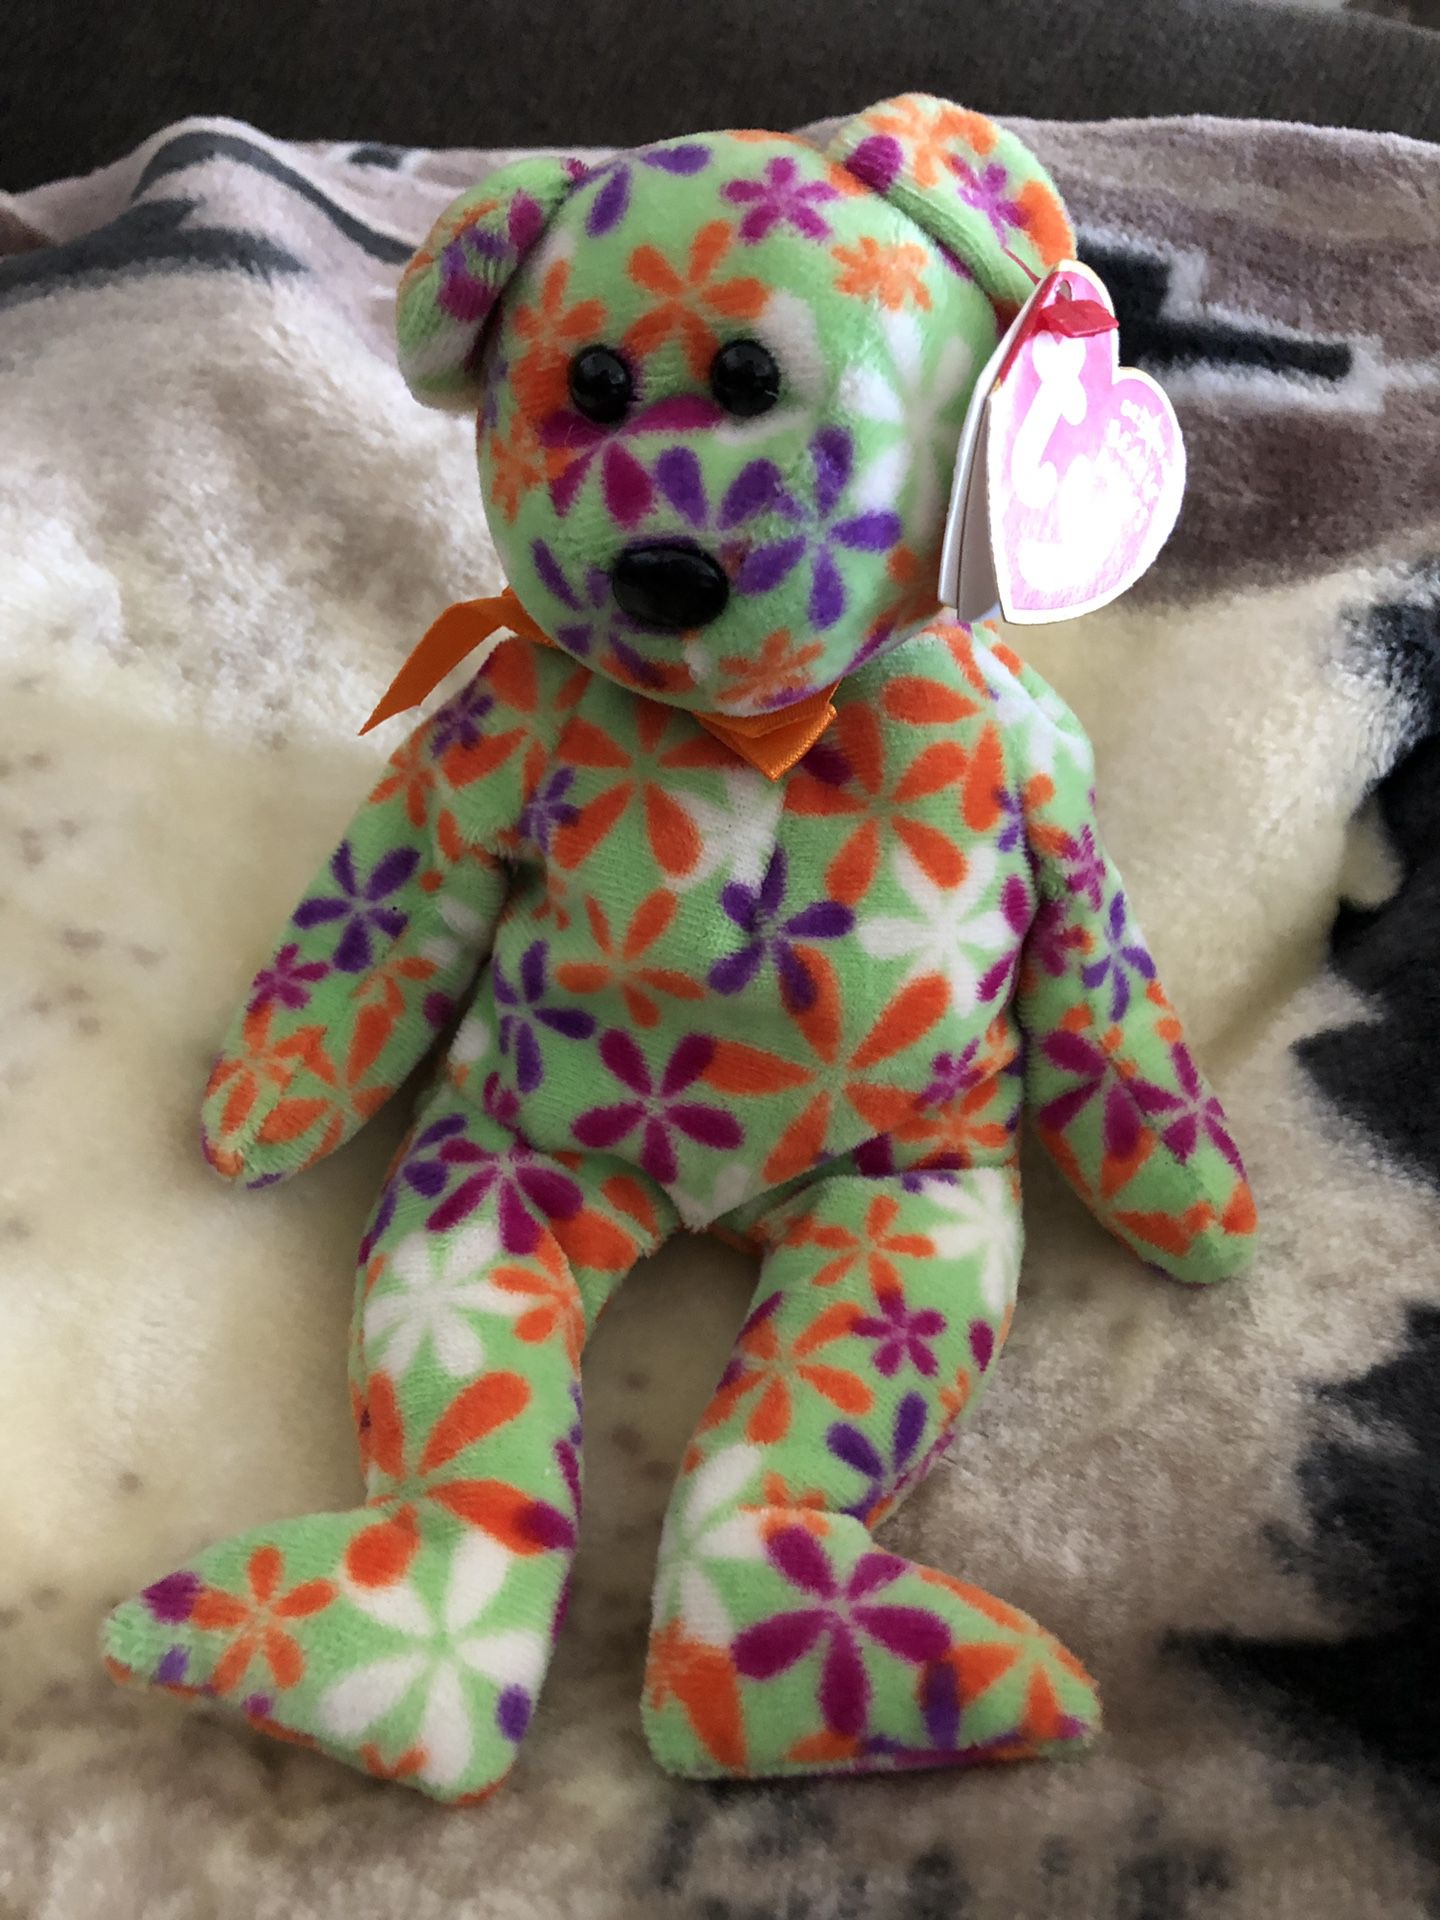 Groovey beanie baby